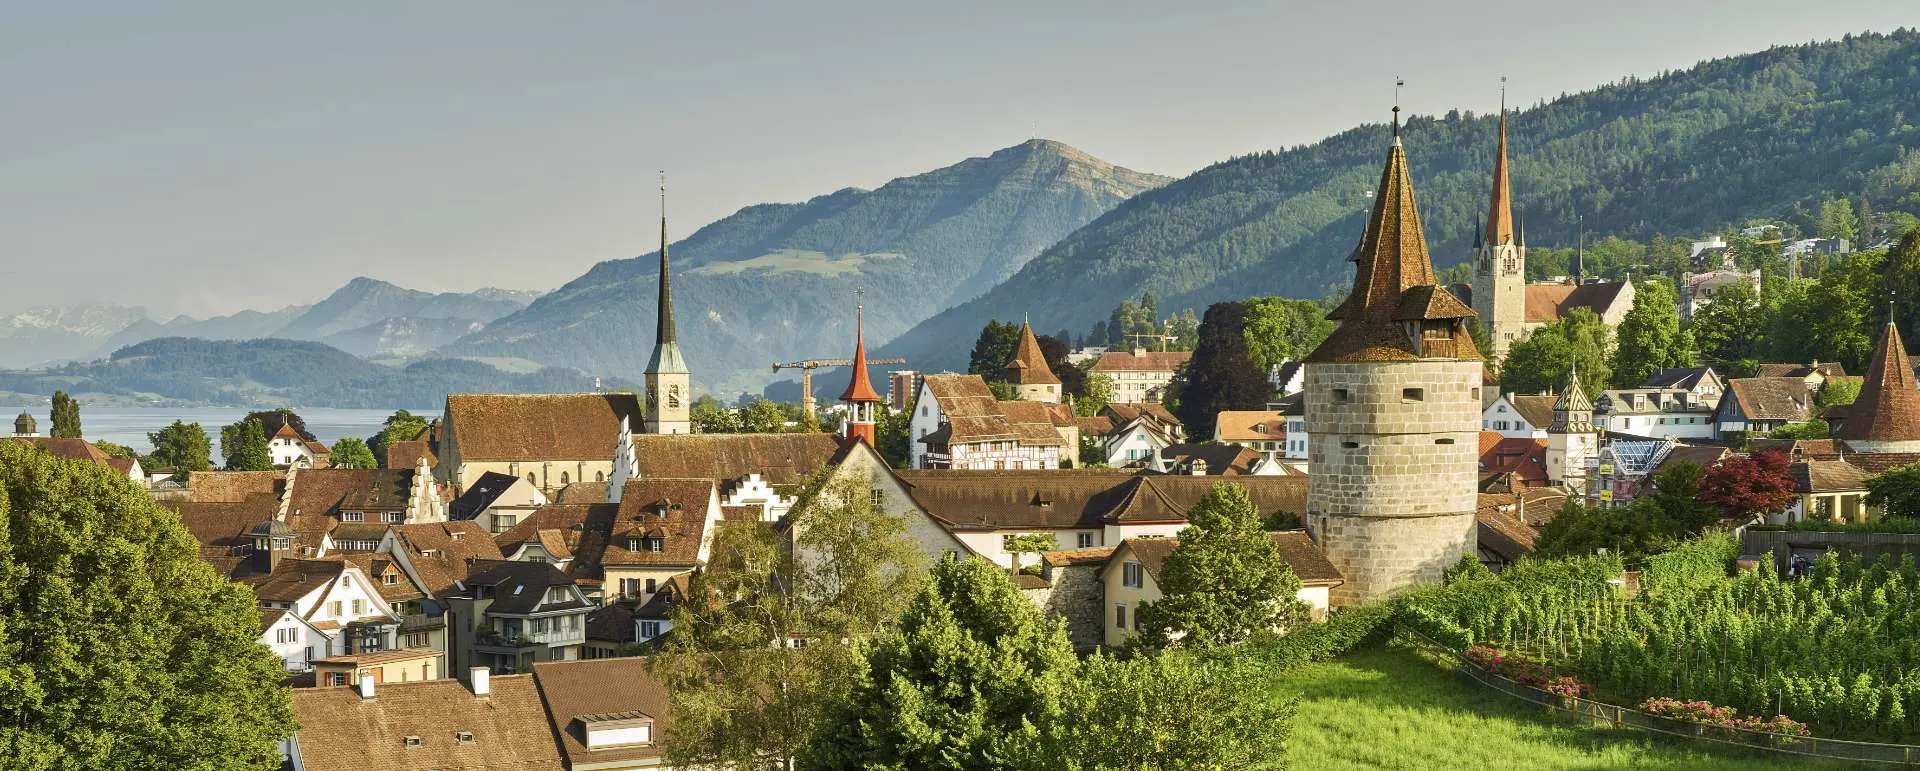 Zug - the destination for bus trips